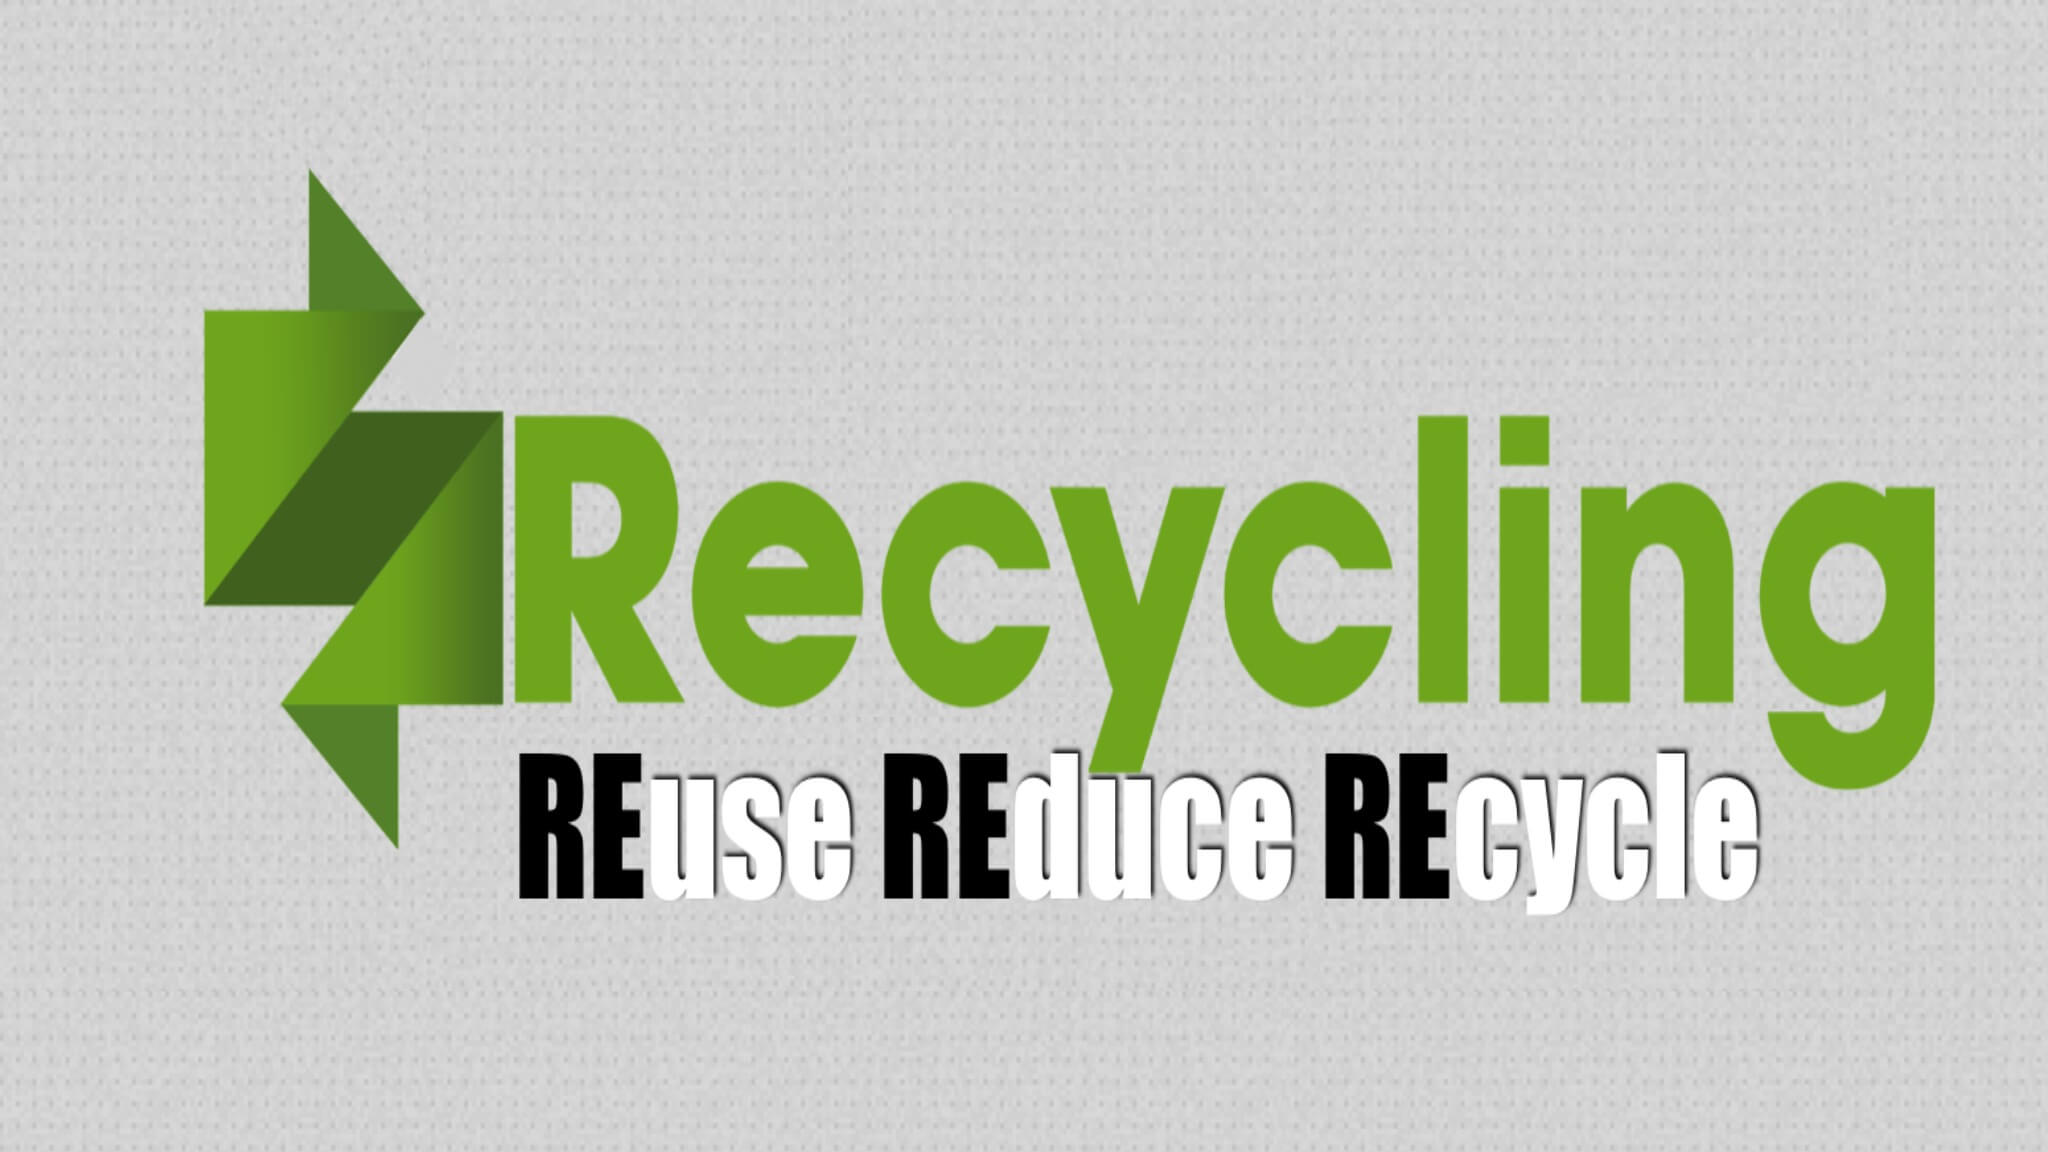 Rugby-Recycling-waste.-2